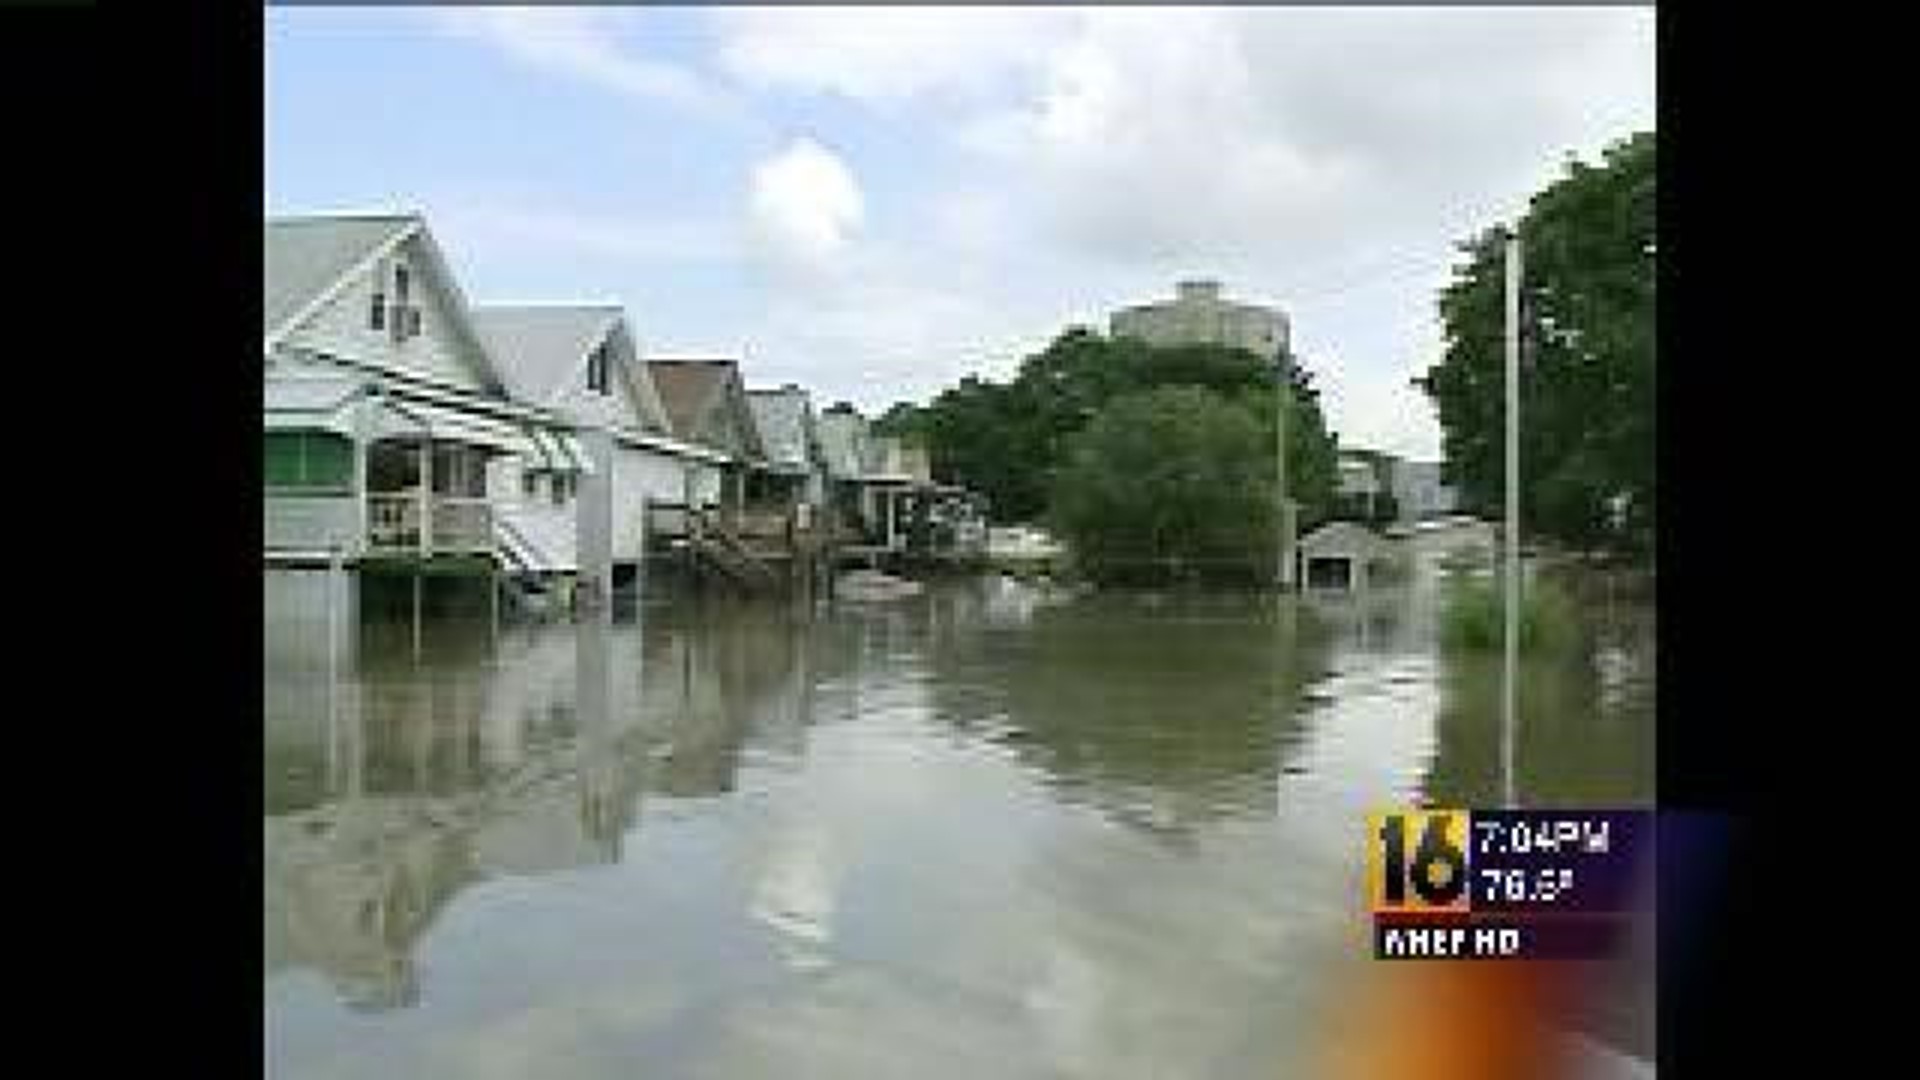 Reducing the Flood Threat to Schuylkill Haven